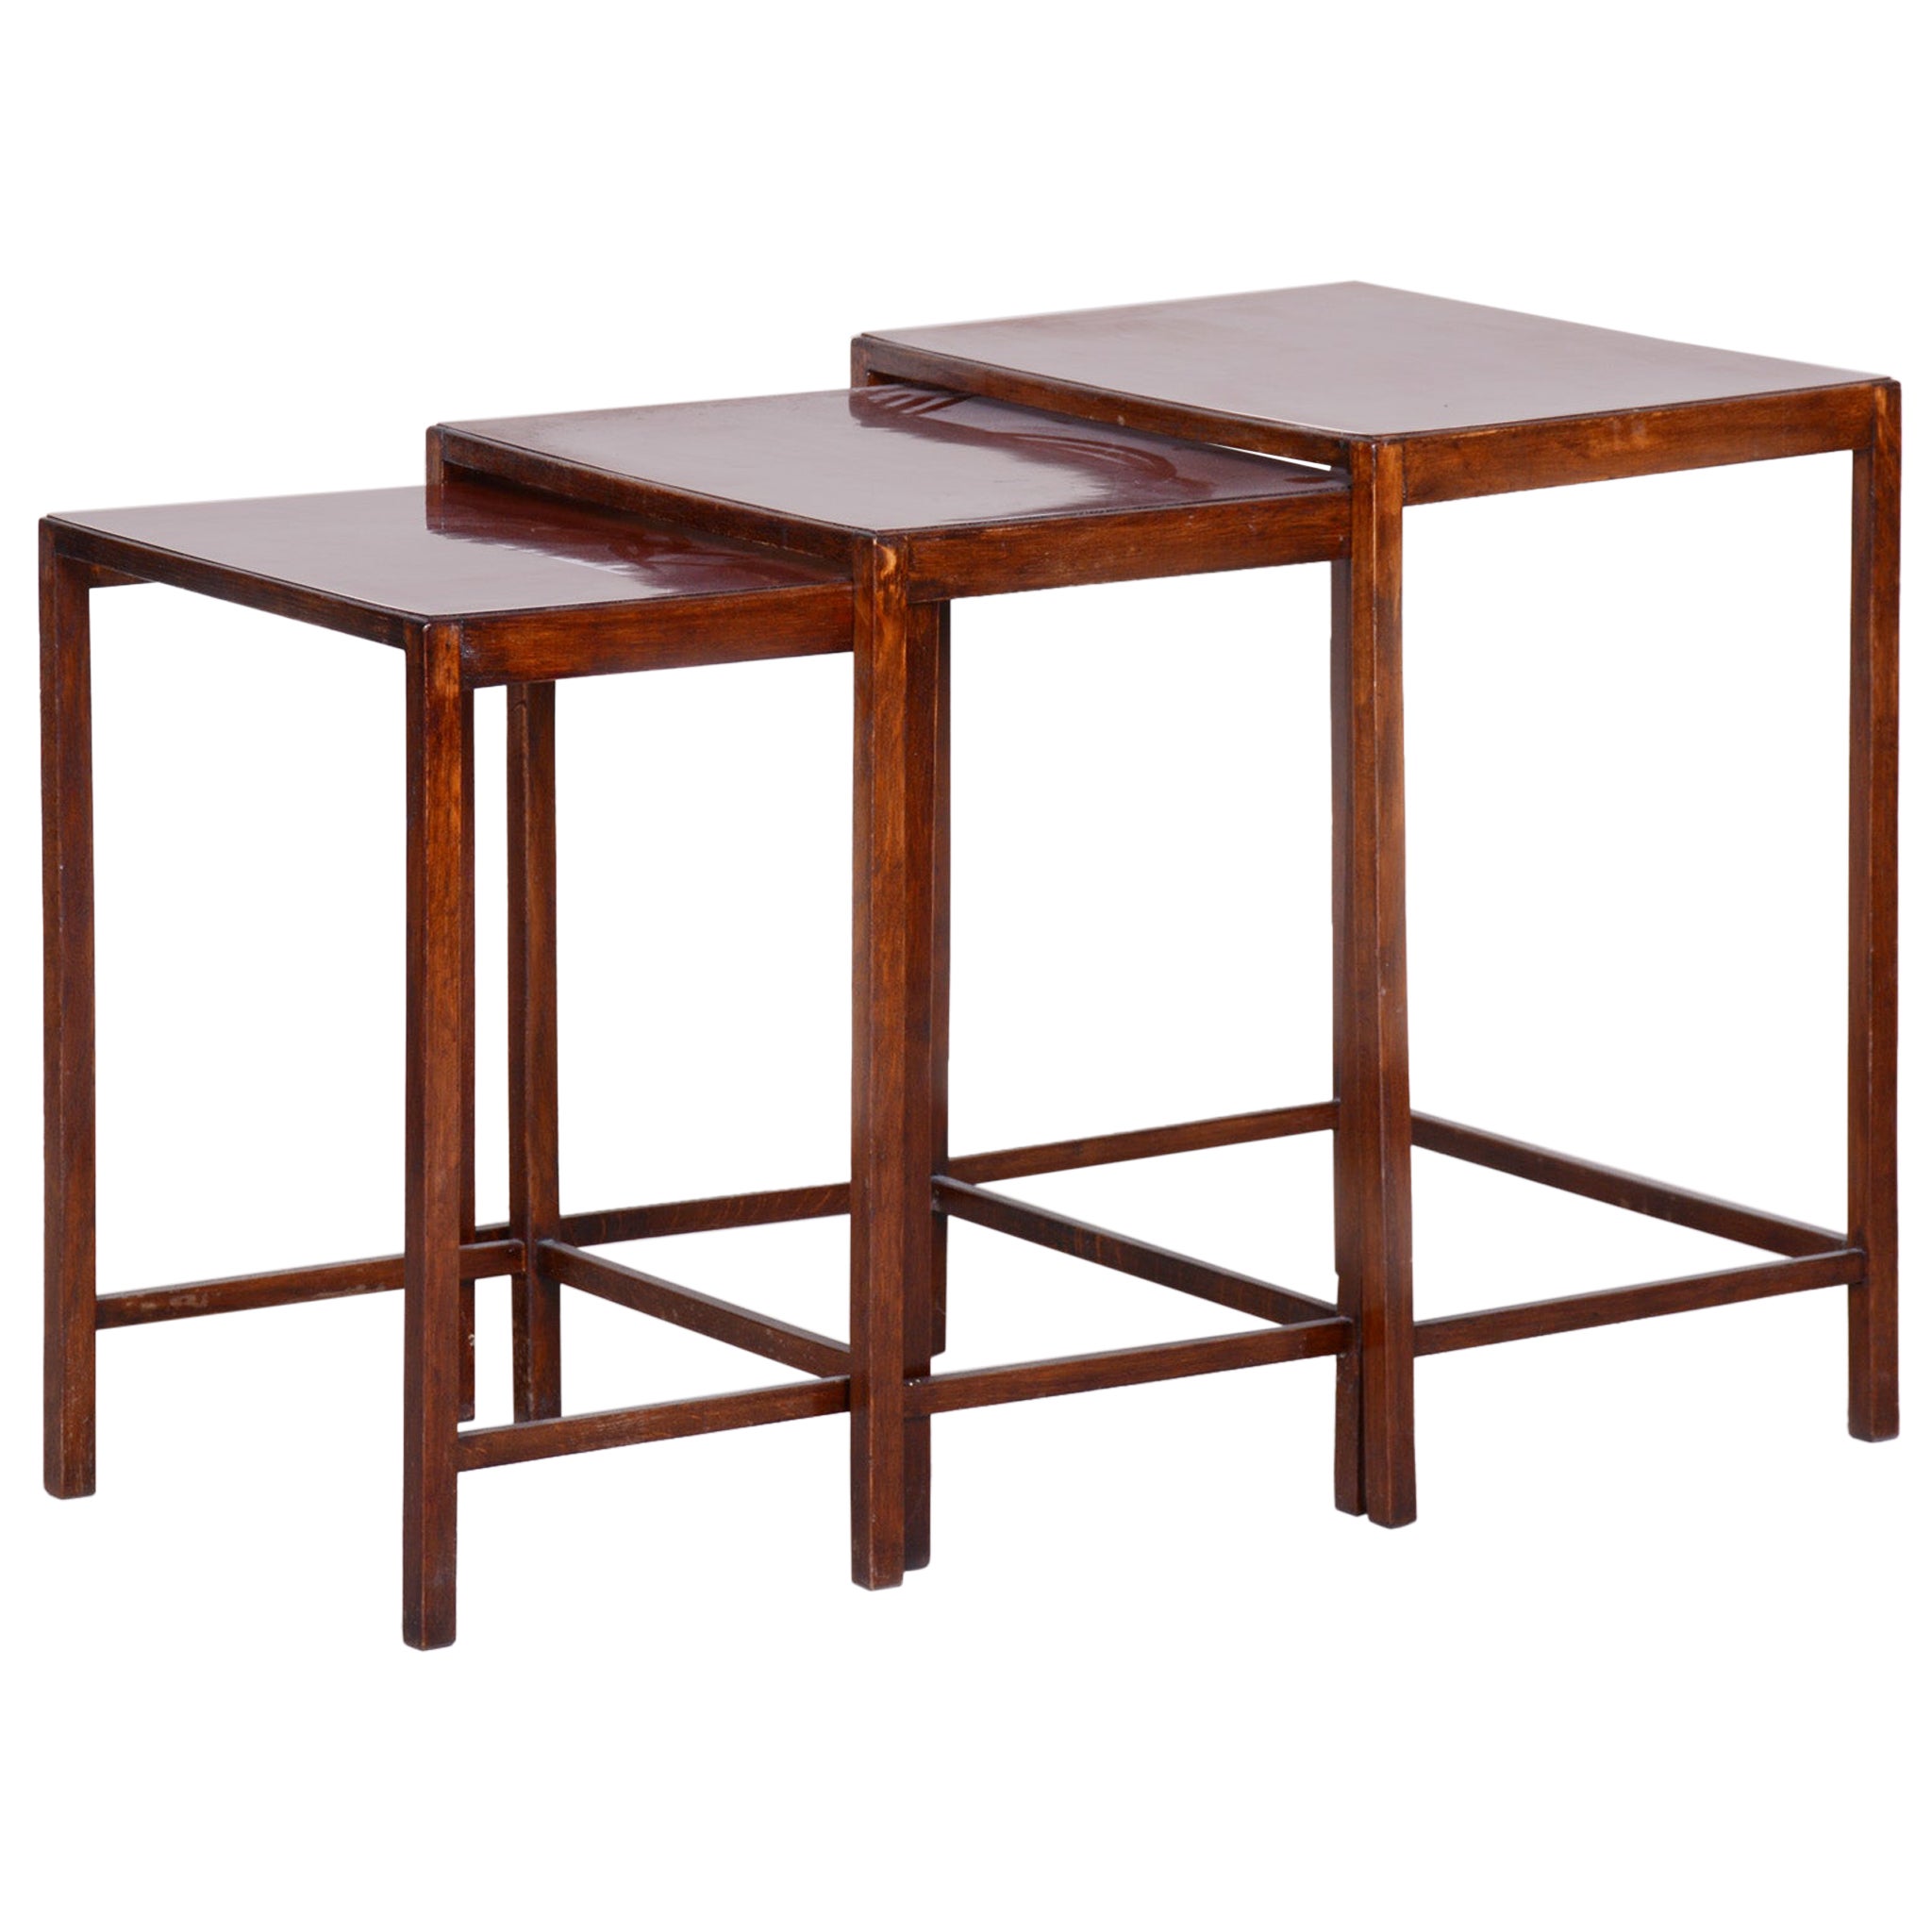 Original Condition Brown Nest Tables Made in the 1930s by Halabala, Czech